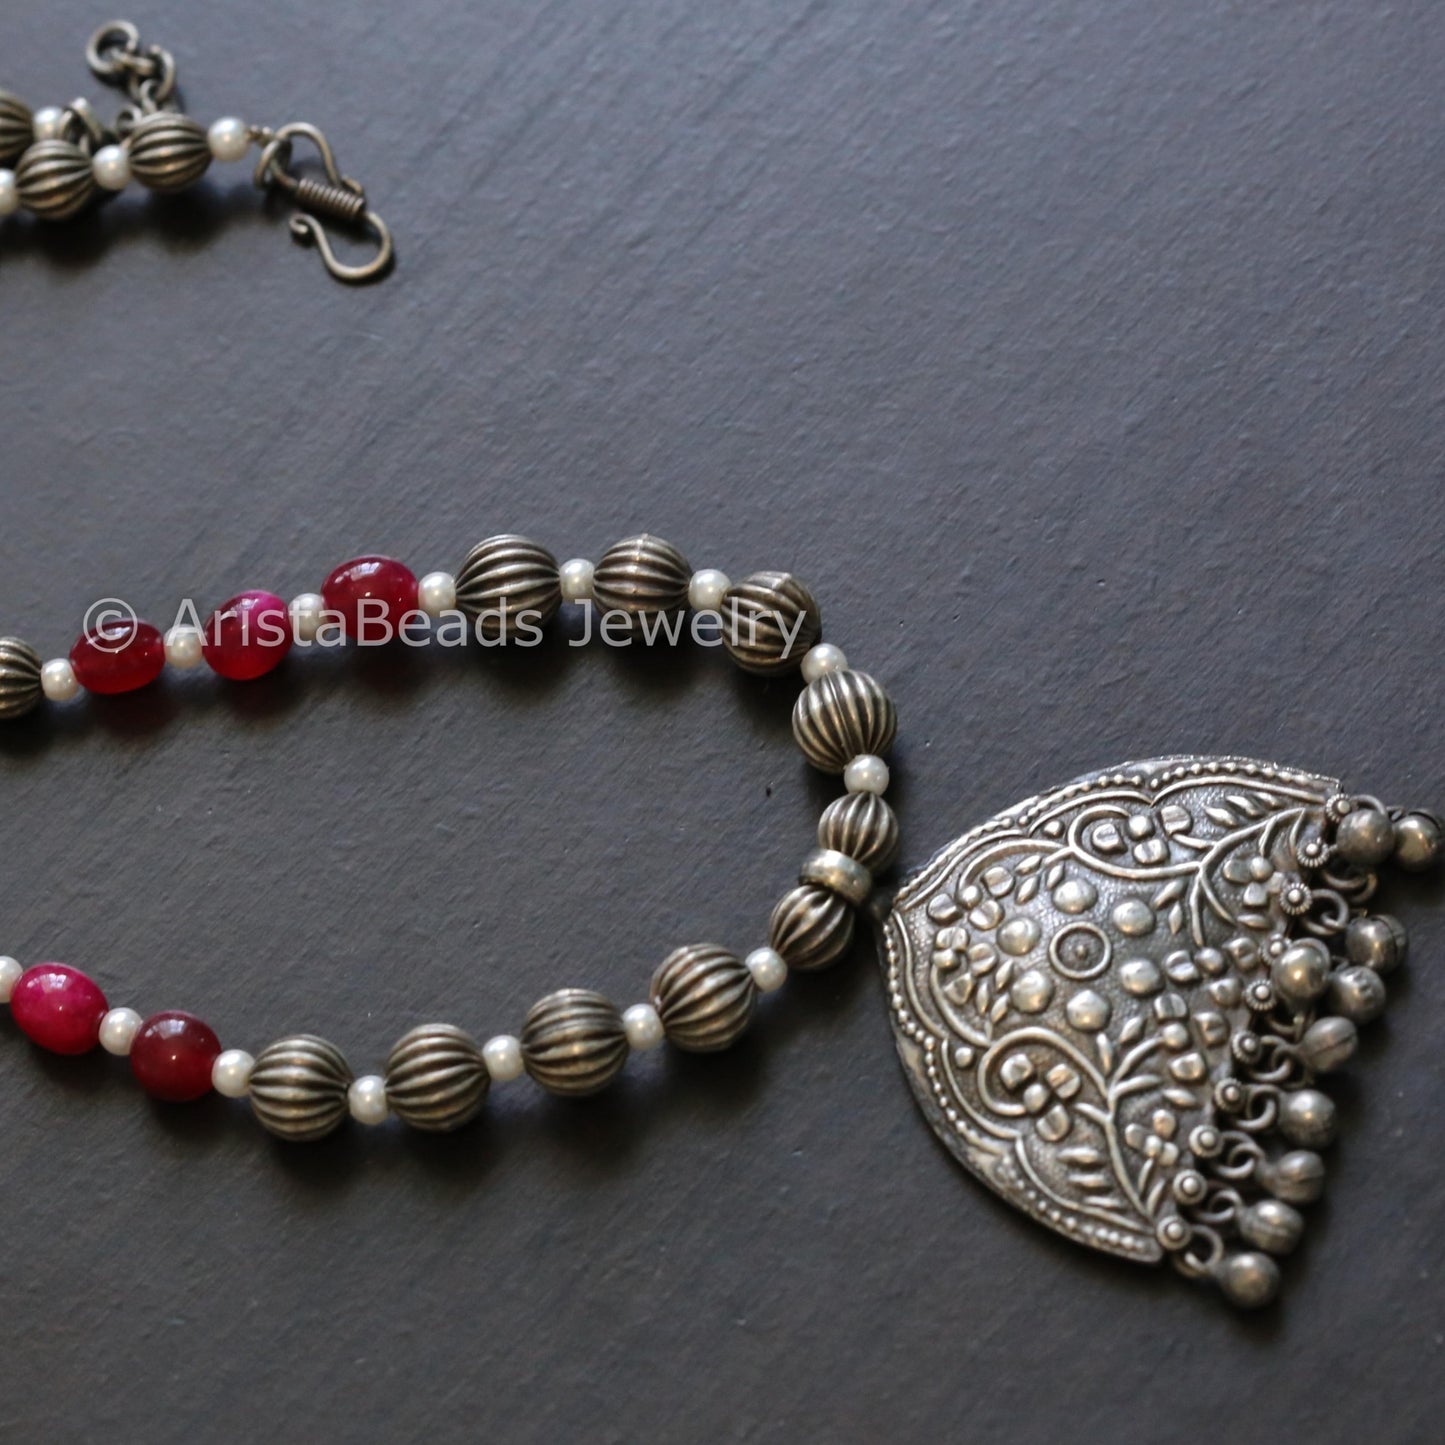 Handmade Silver Look Beaded Necklace - Style 5